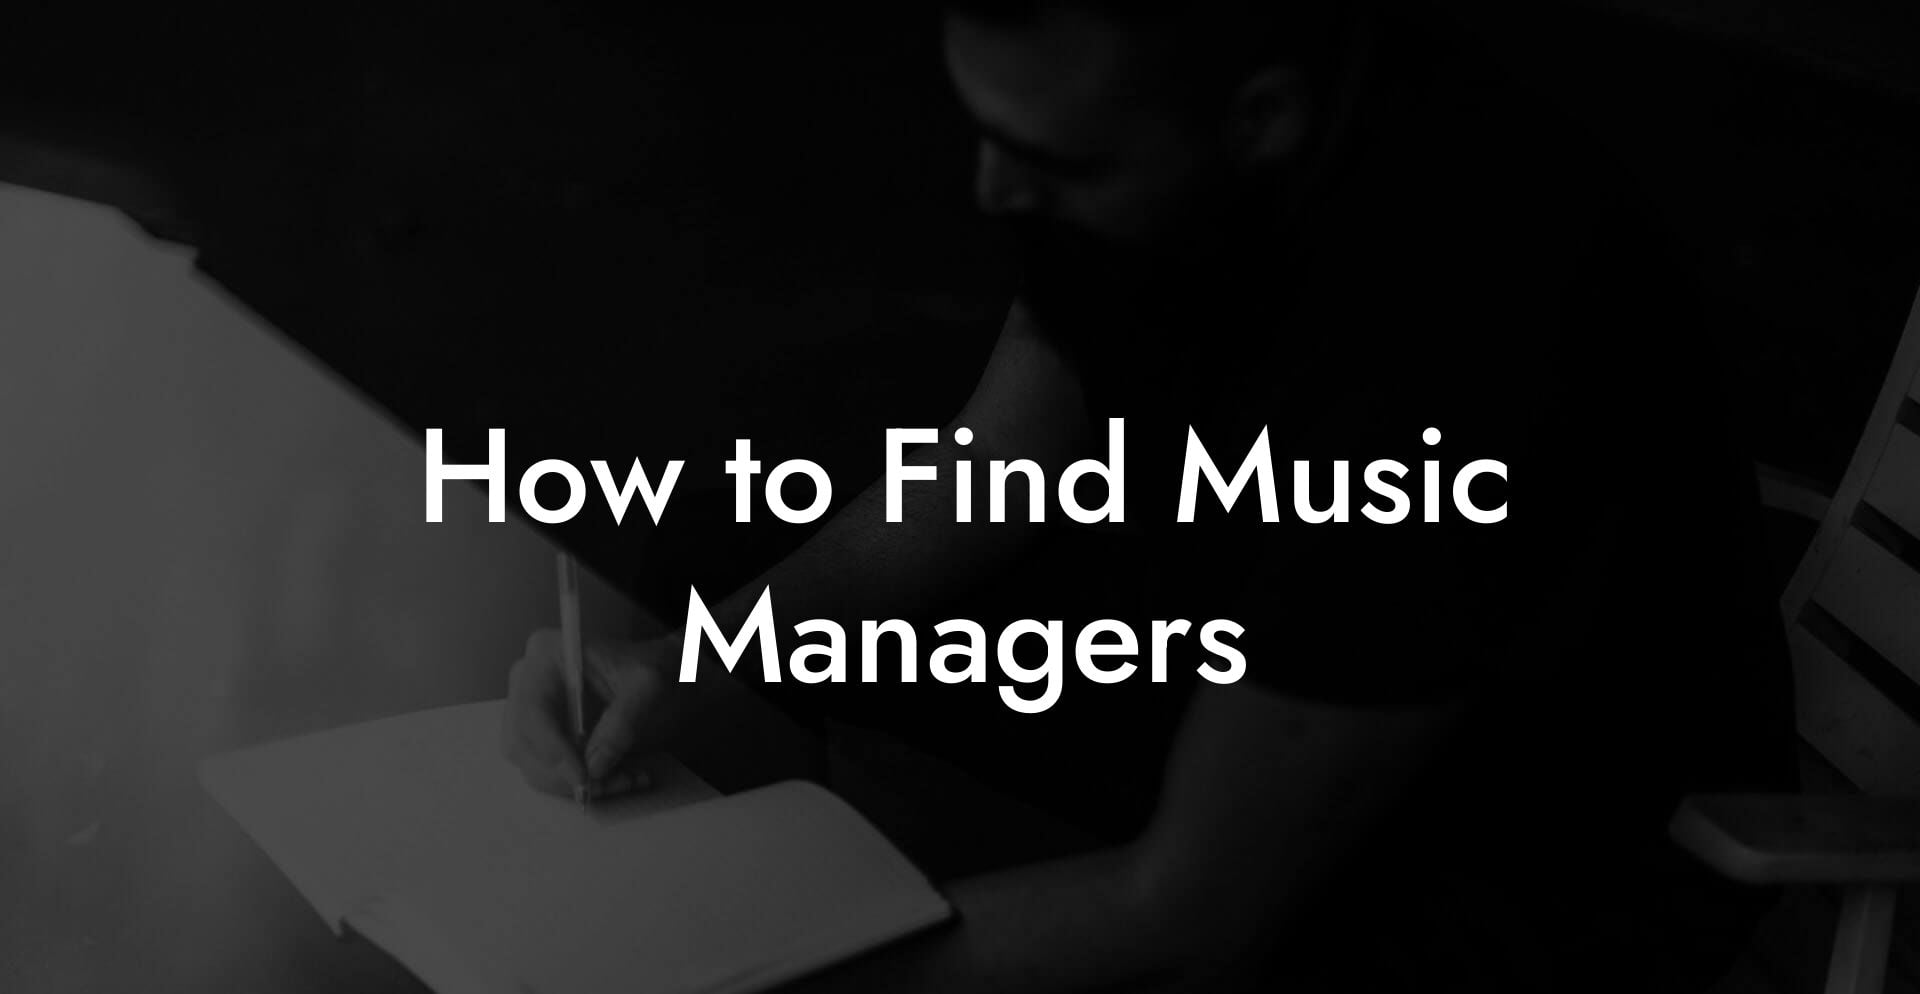 How to Find Music Managers